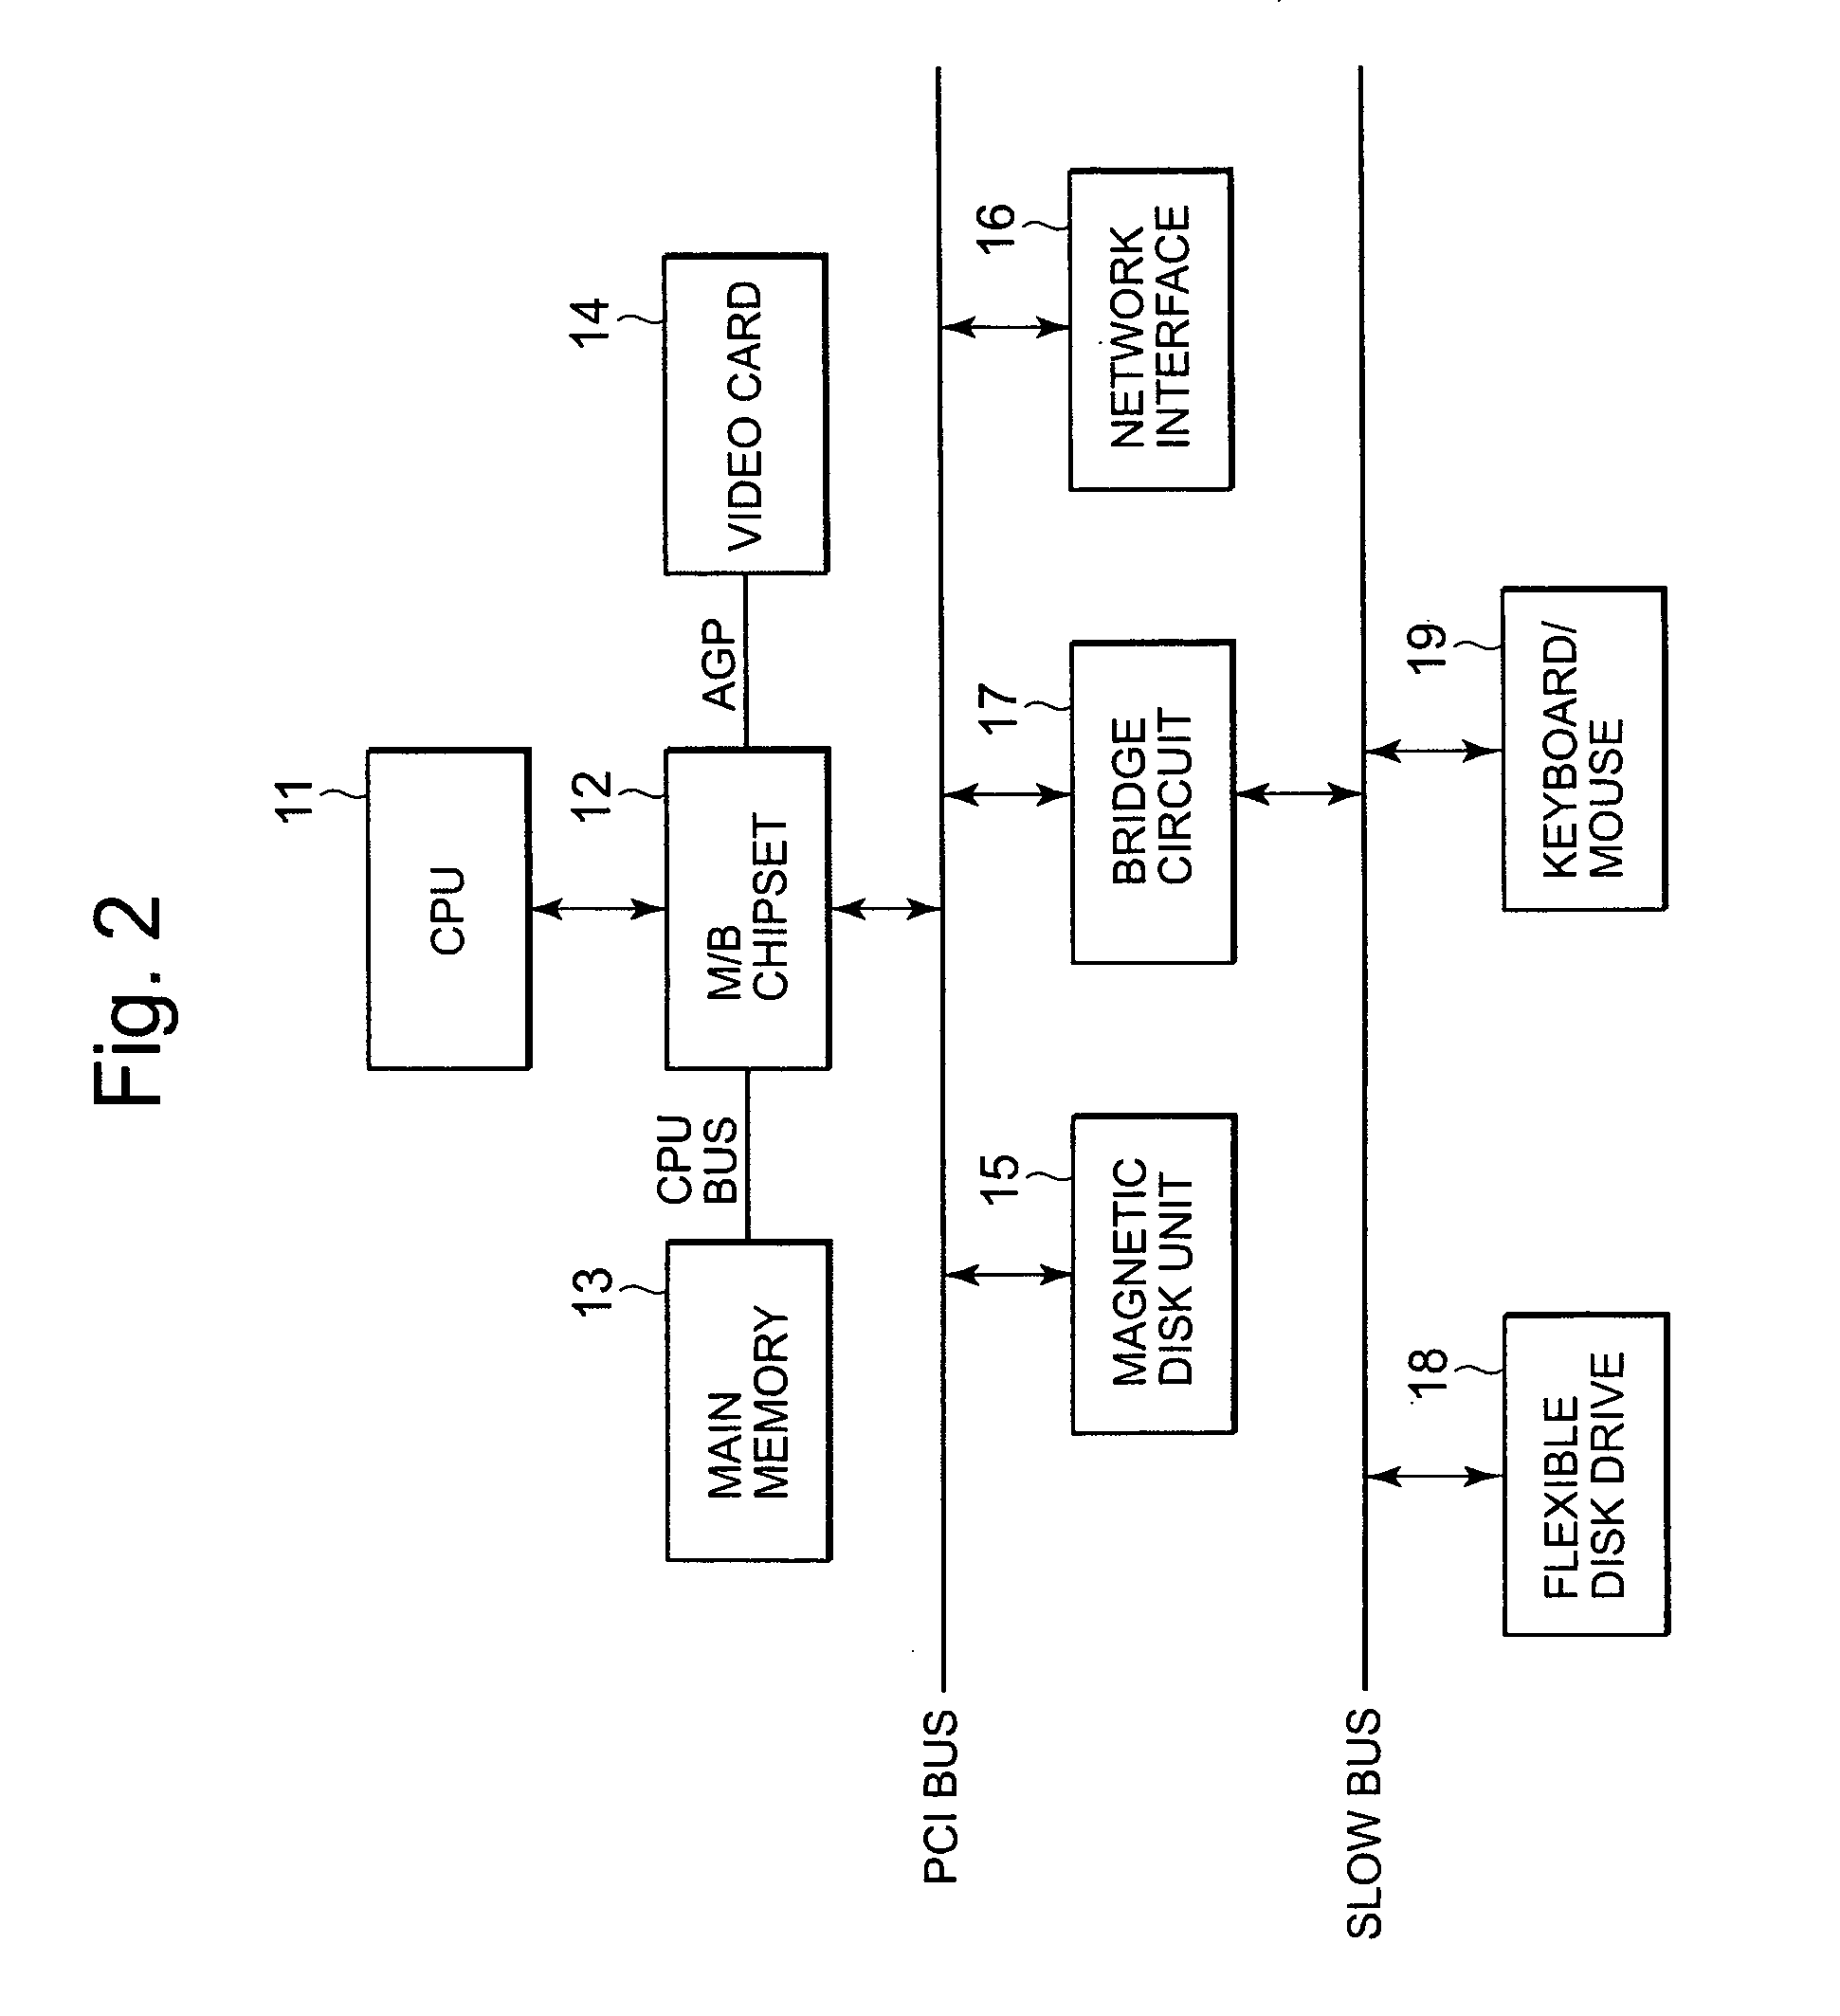 Apparatus, computer system, and data processing method for using ontology